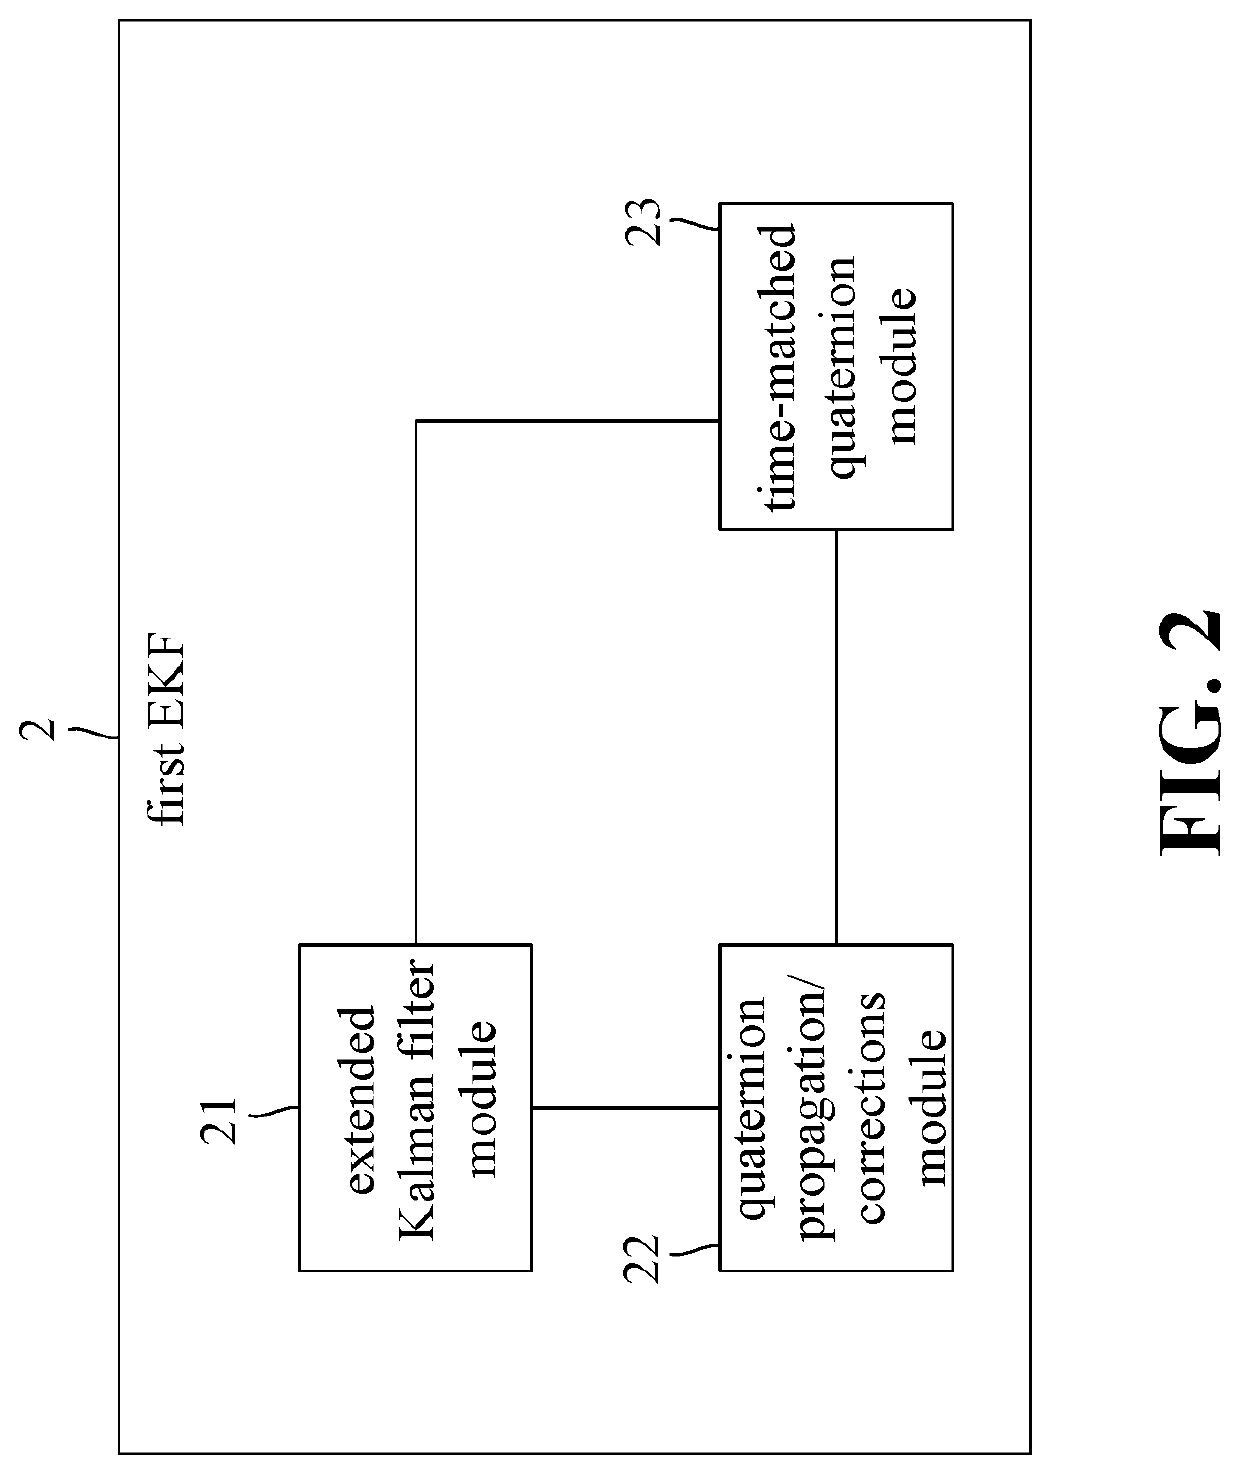 Earth satellite attitude data fusion system and method thereof